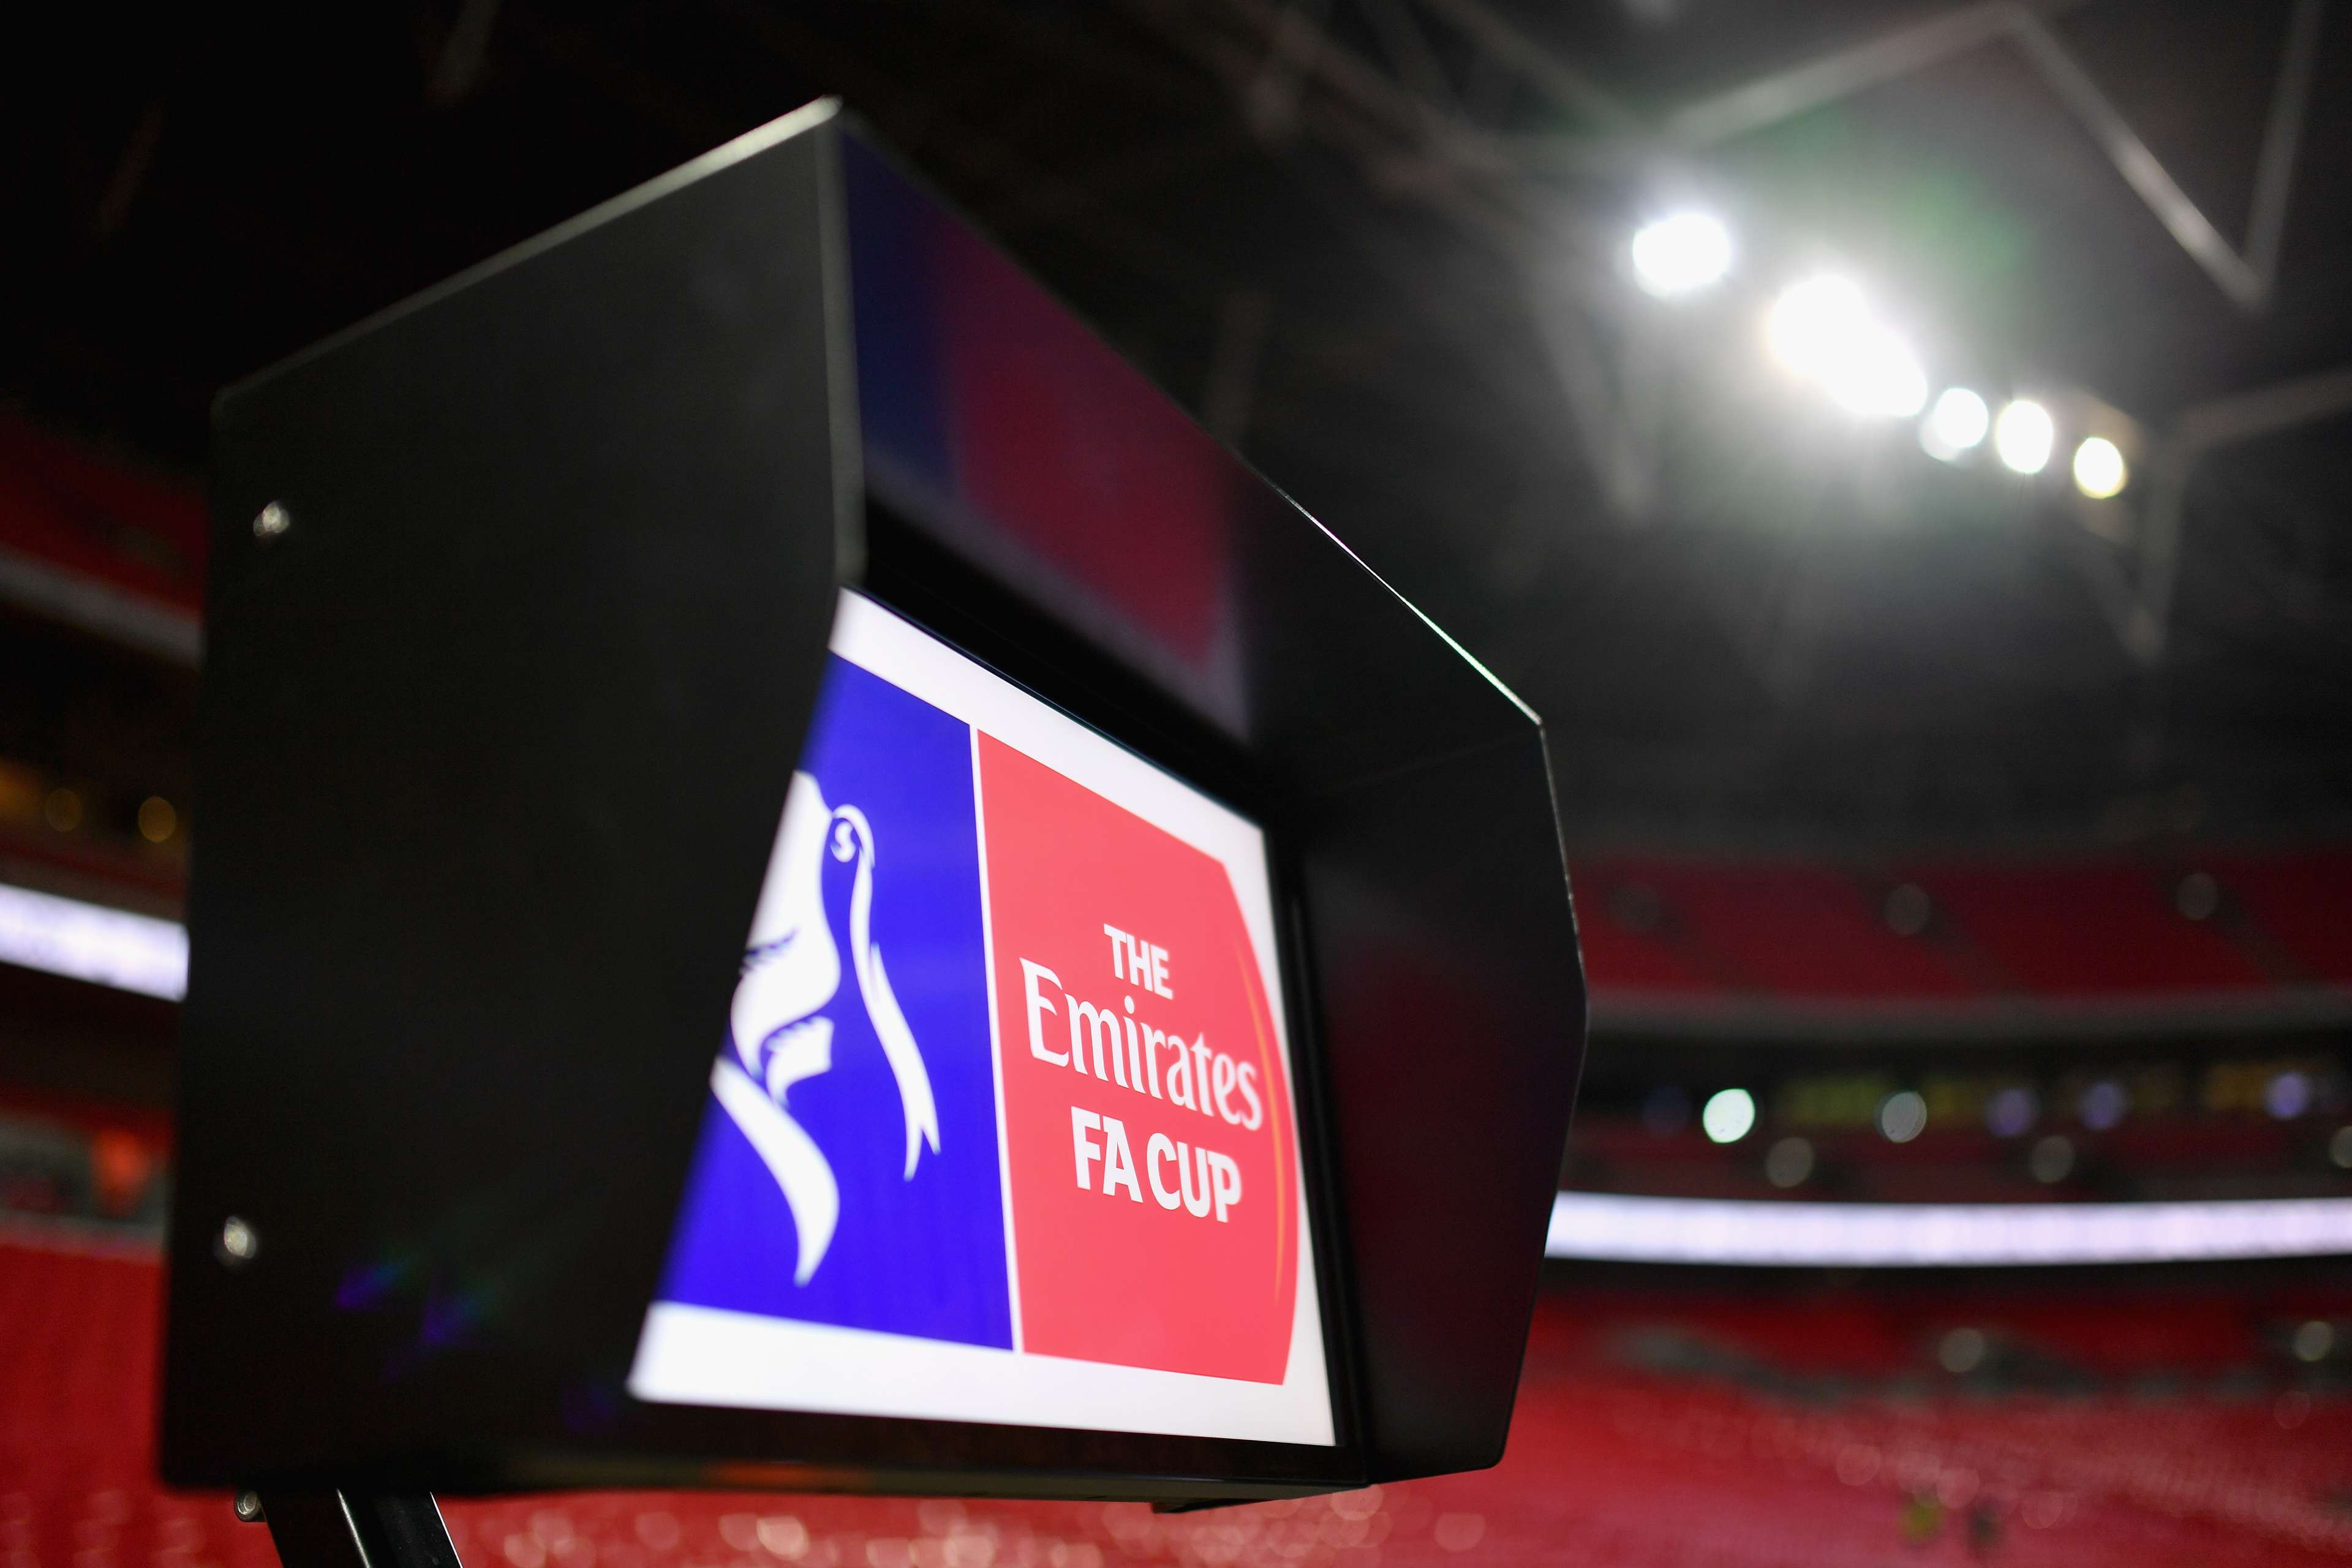 The VAR screen is seen pitchside prior to The Emirates FA Cup 2019